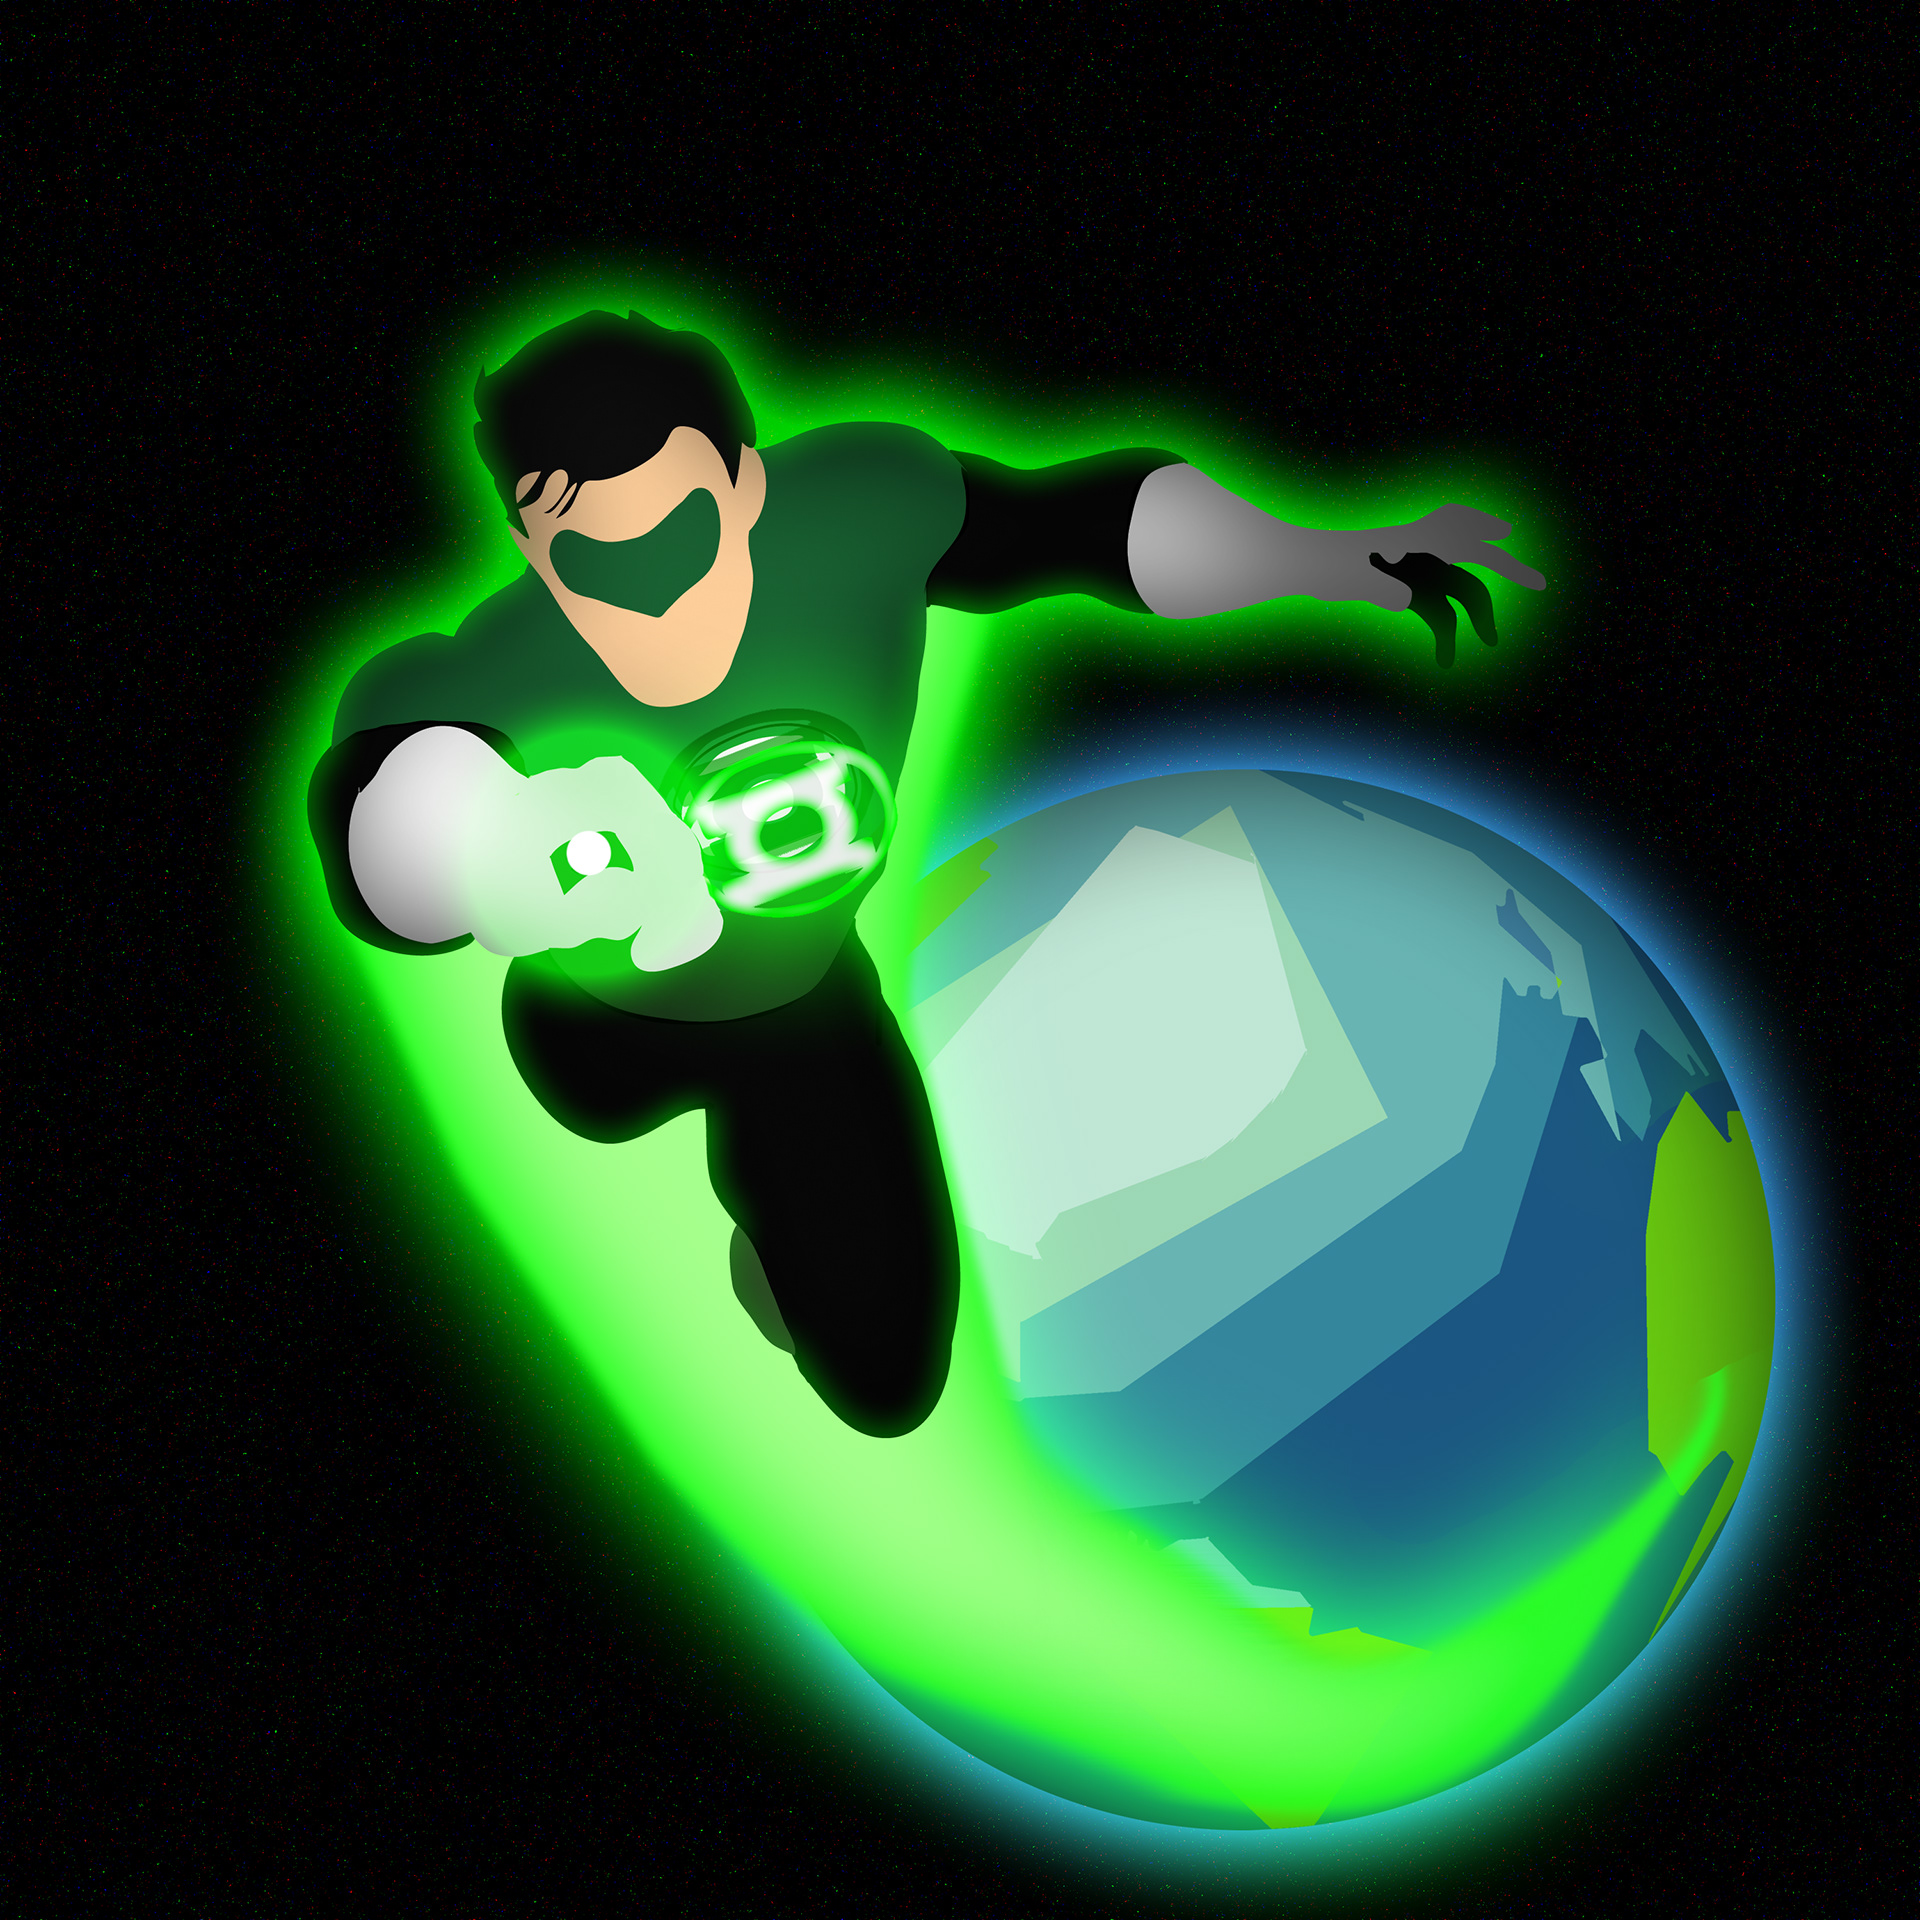 This is none other than Hal Jordan himself - an experiment in flatting in colors and then using filters and effects to provide scale and depth. I like how this one turned out.